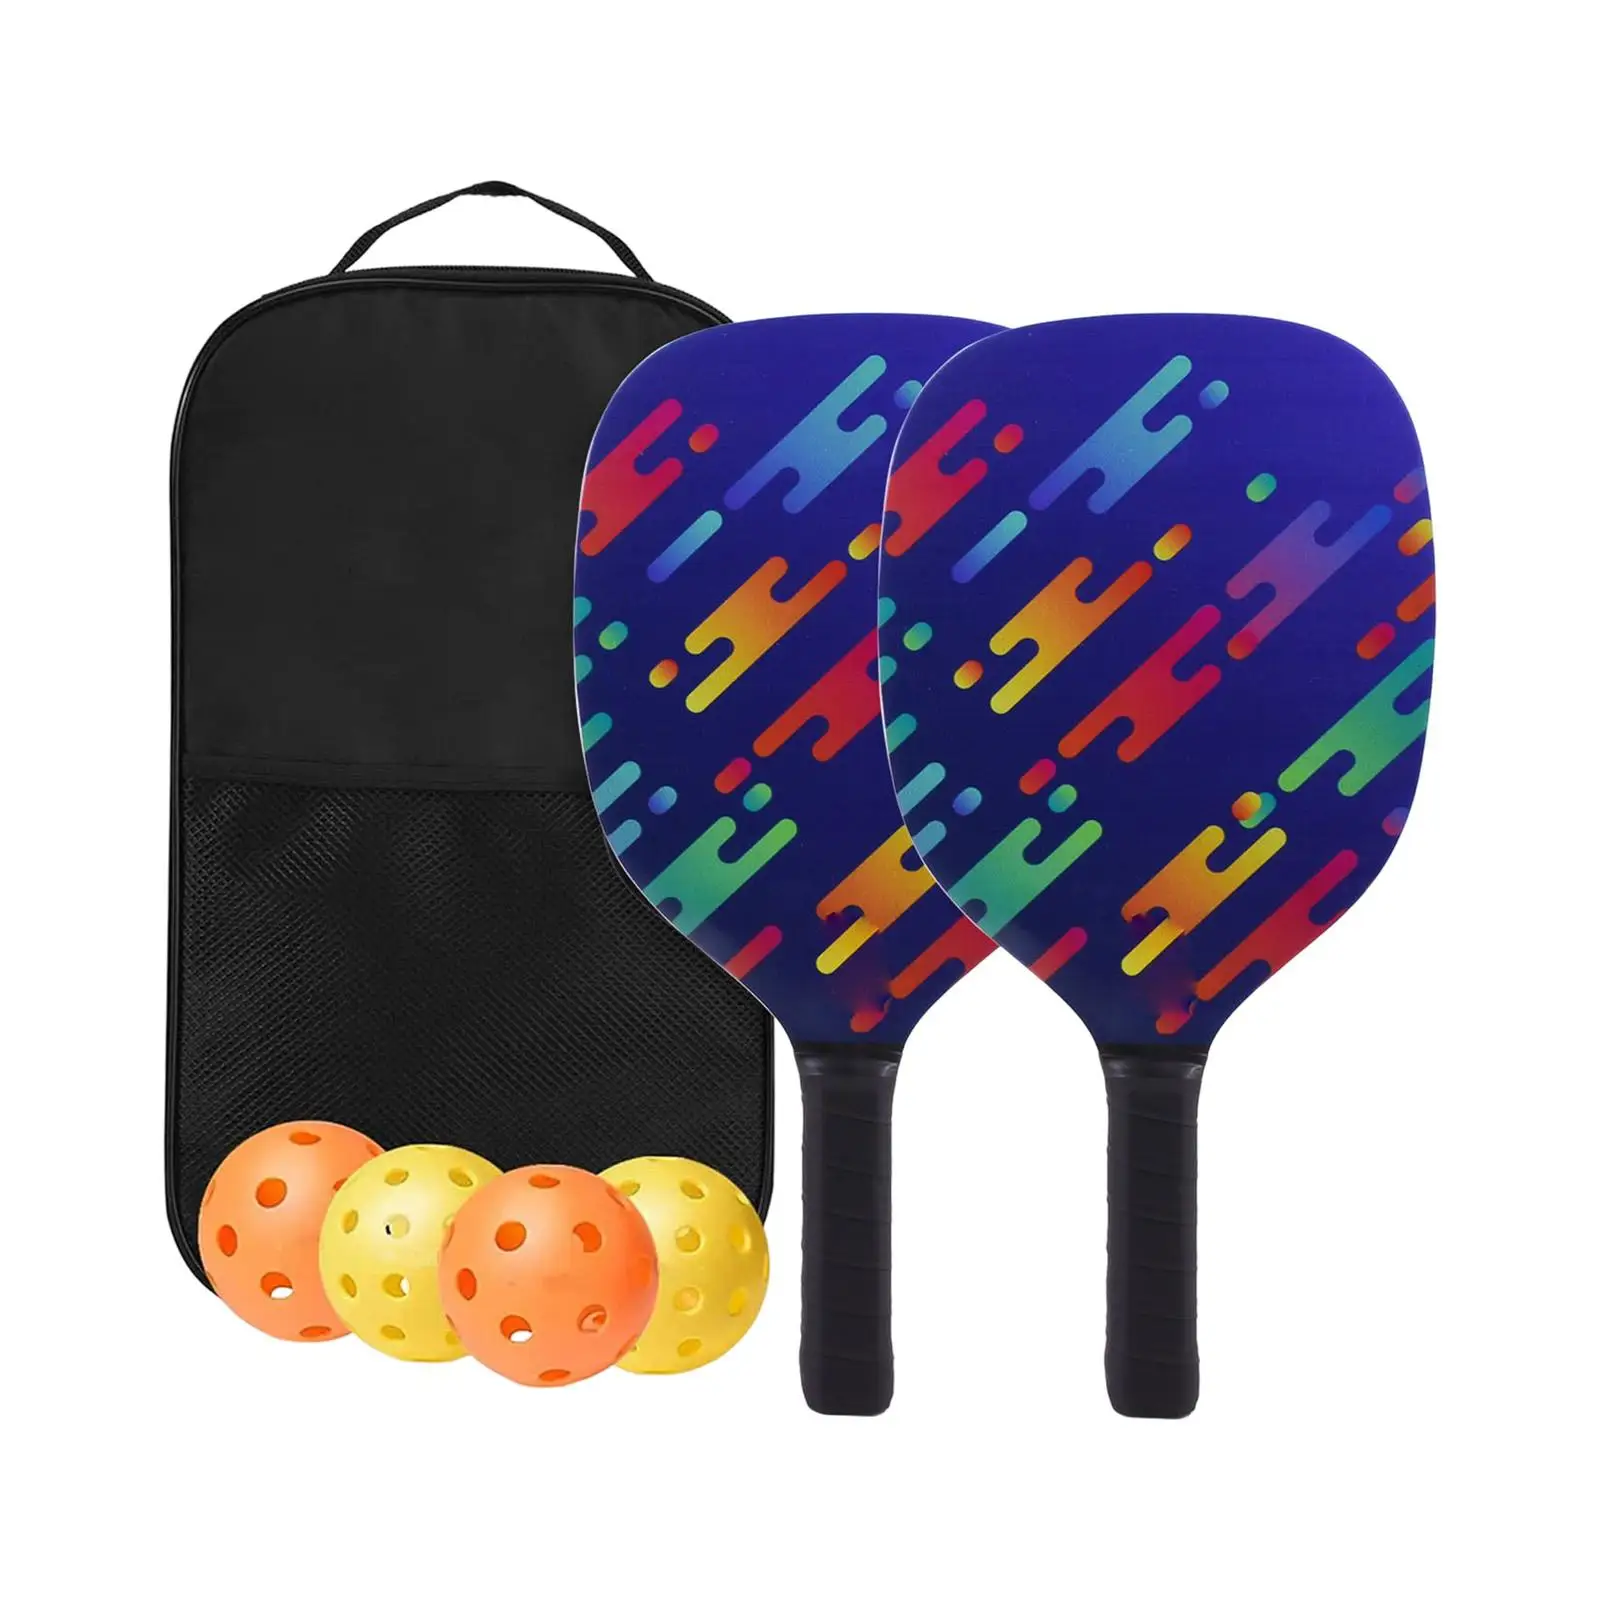 Portable Pickleball Paddles Set with Balls Pickleball Set for Indoor Outdoor